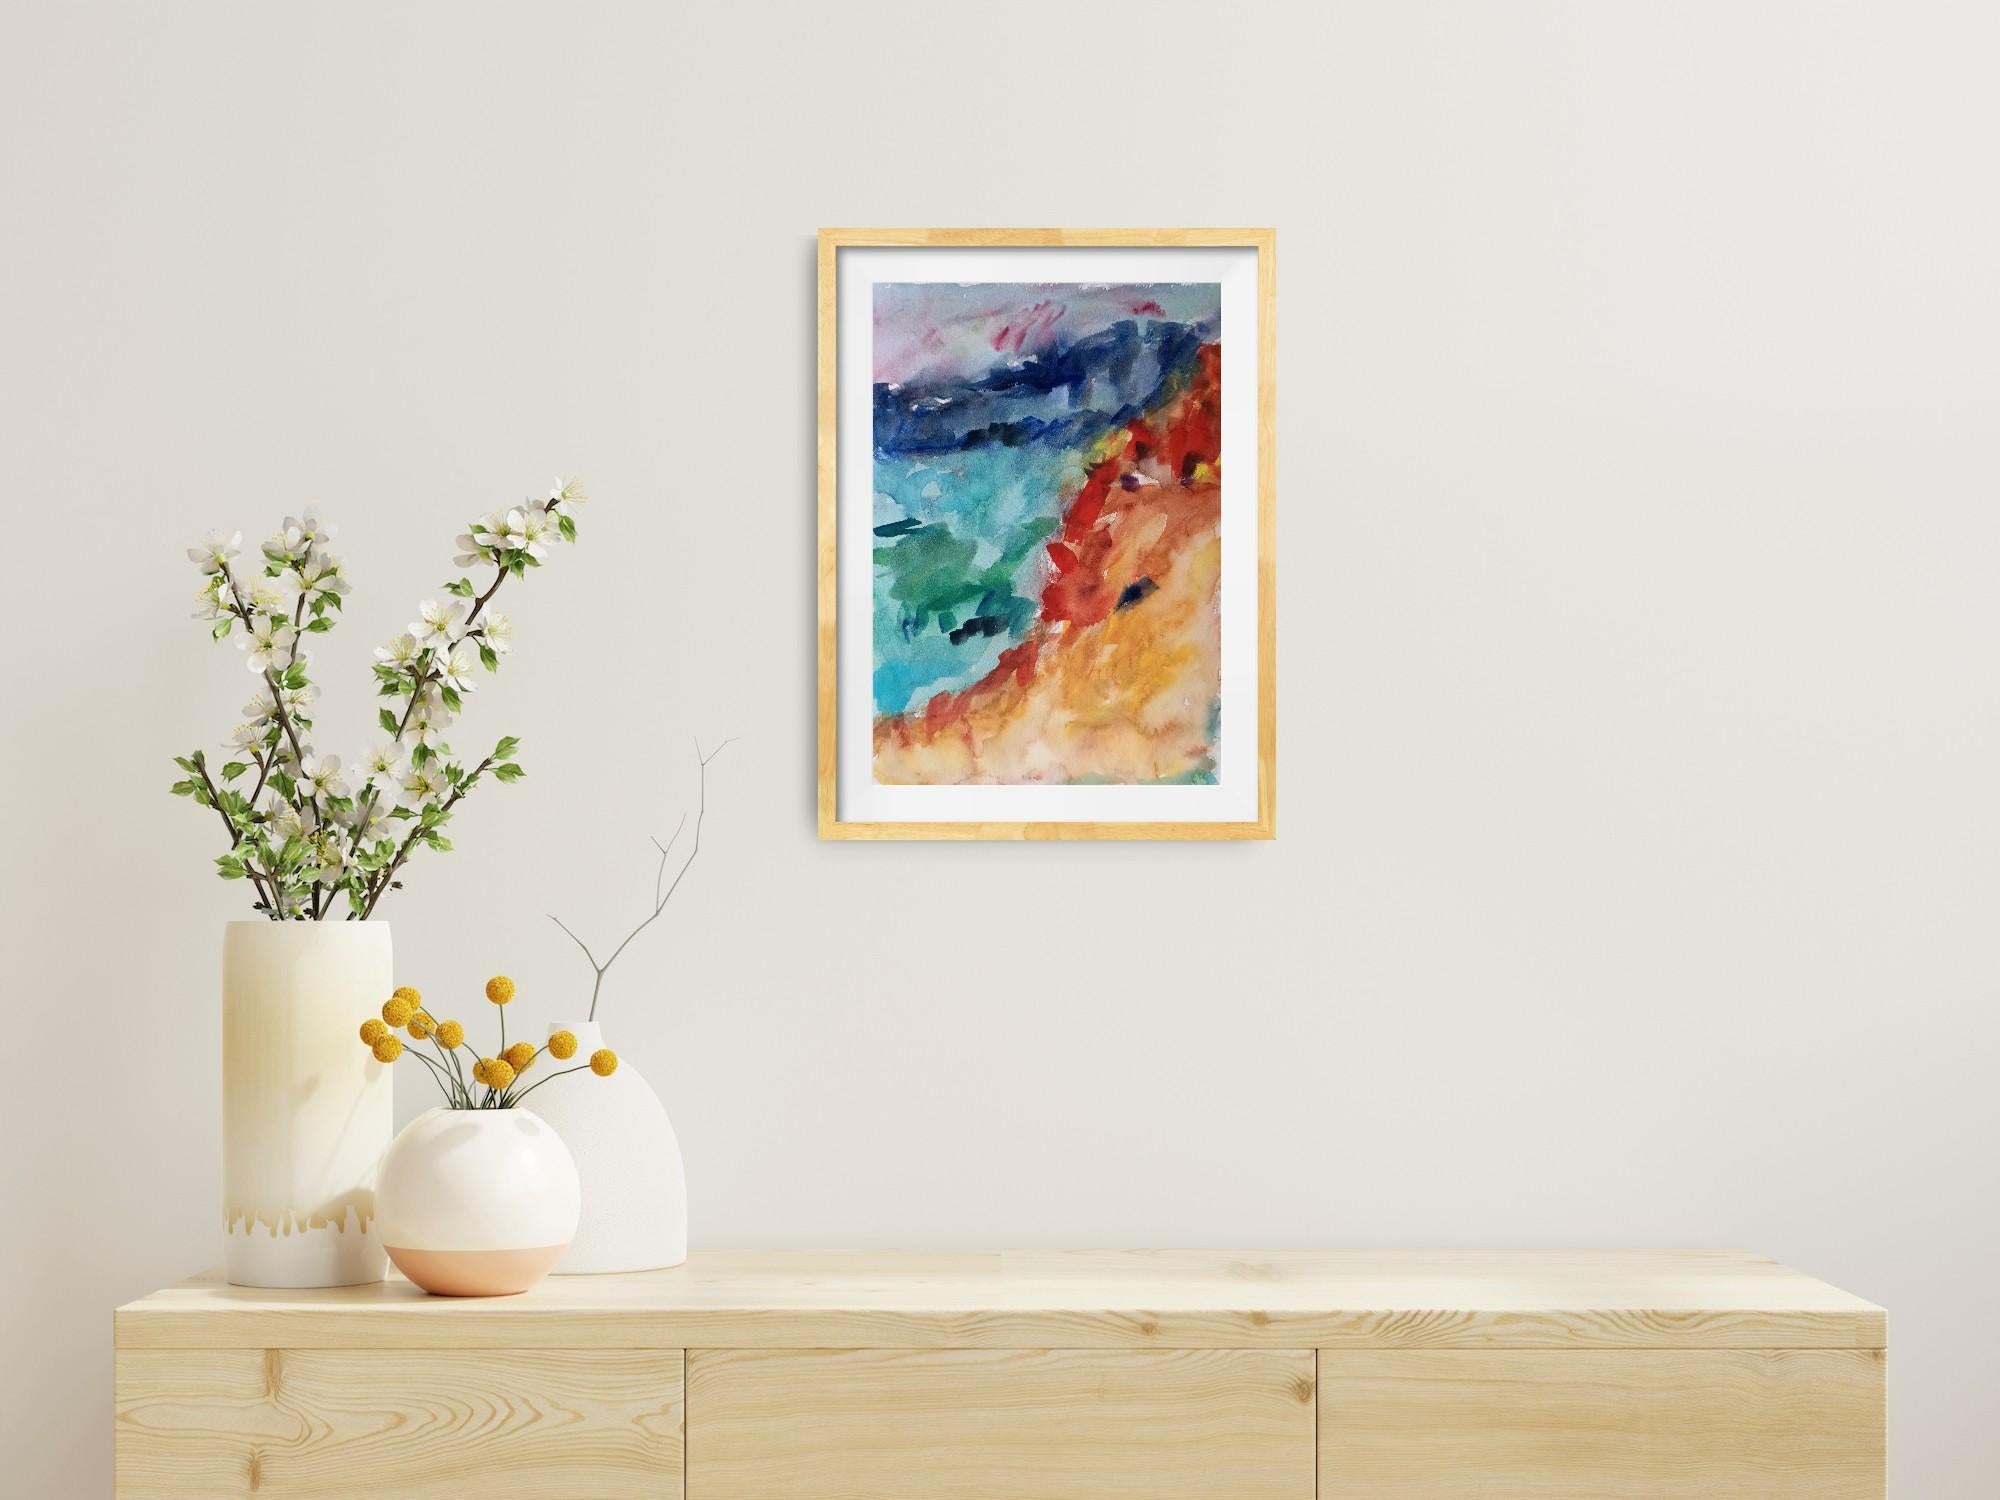 This artwork makes part of my small collection of abstract paintings created in various vivid tones.

This collection was created for contemporary interior decoration to bring   a touch of color into your space.

In my abstract artworks I manipulate